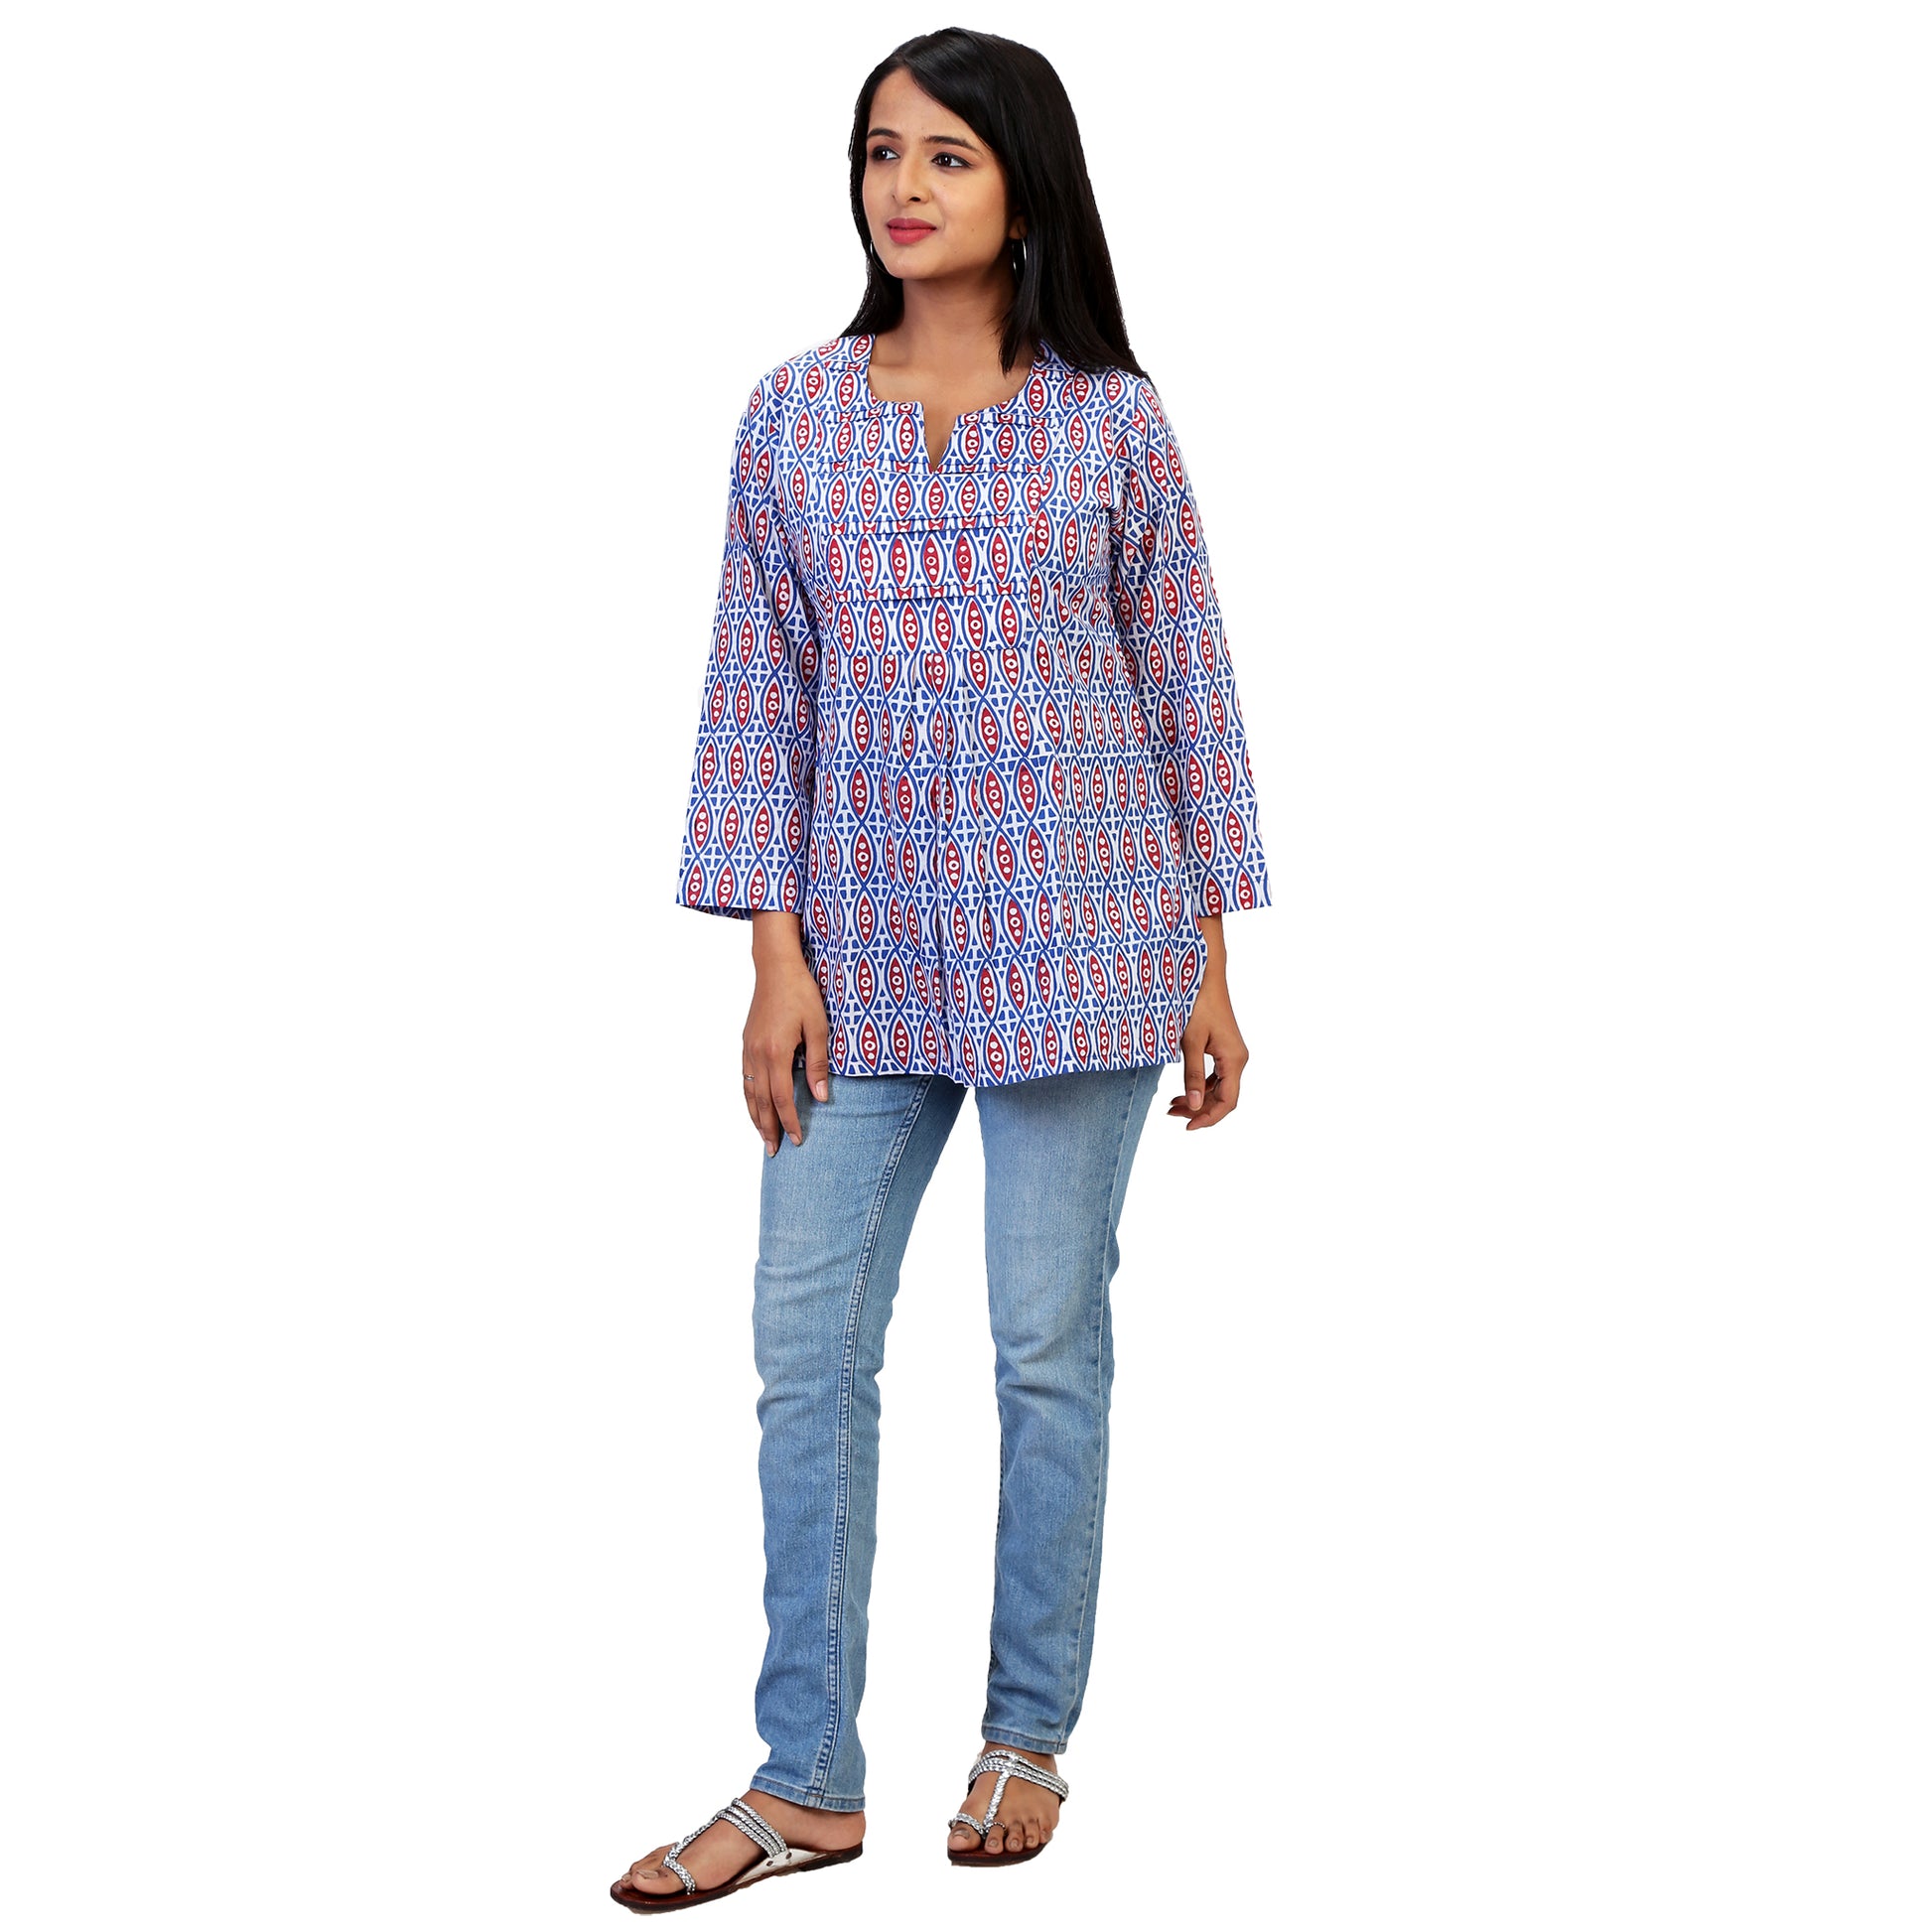 Buy Latest Long Cotton Tops Online For Women